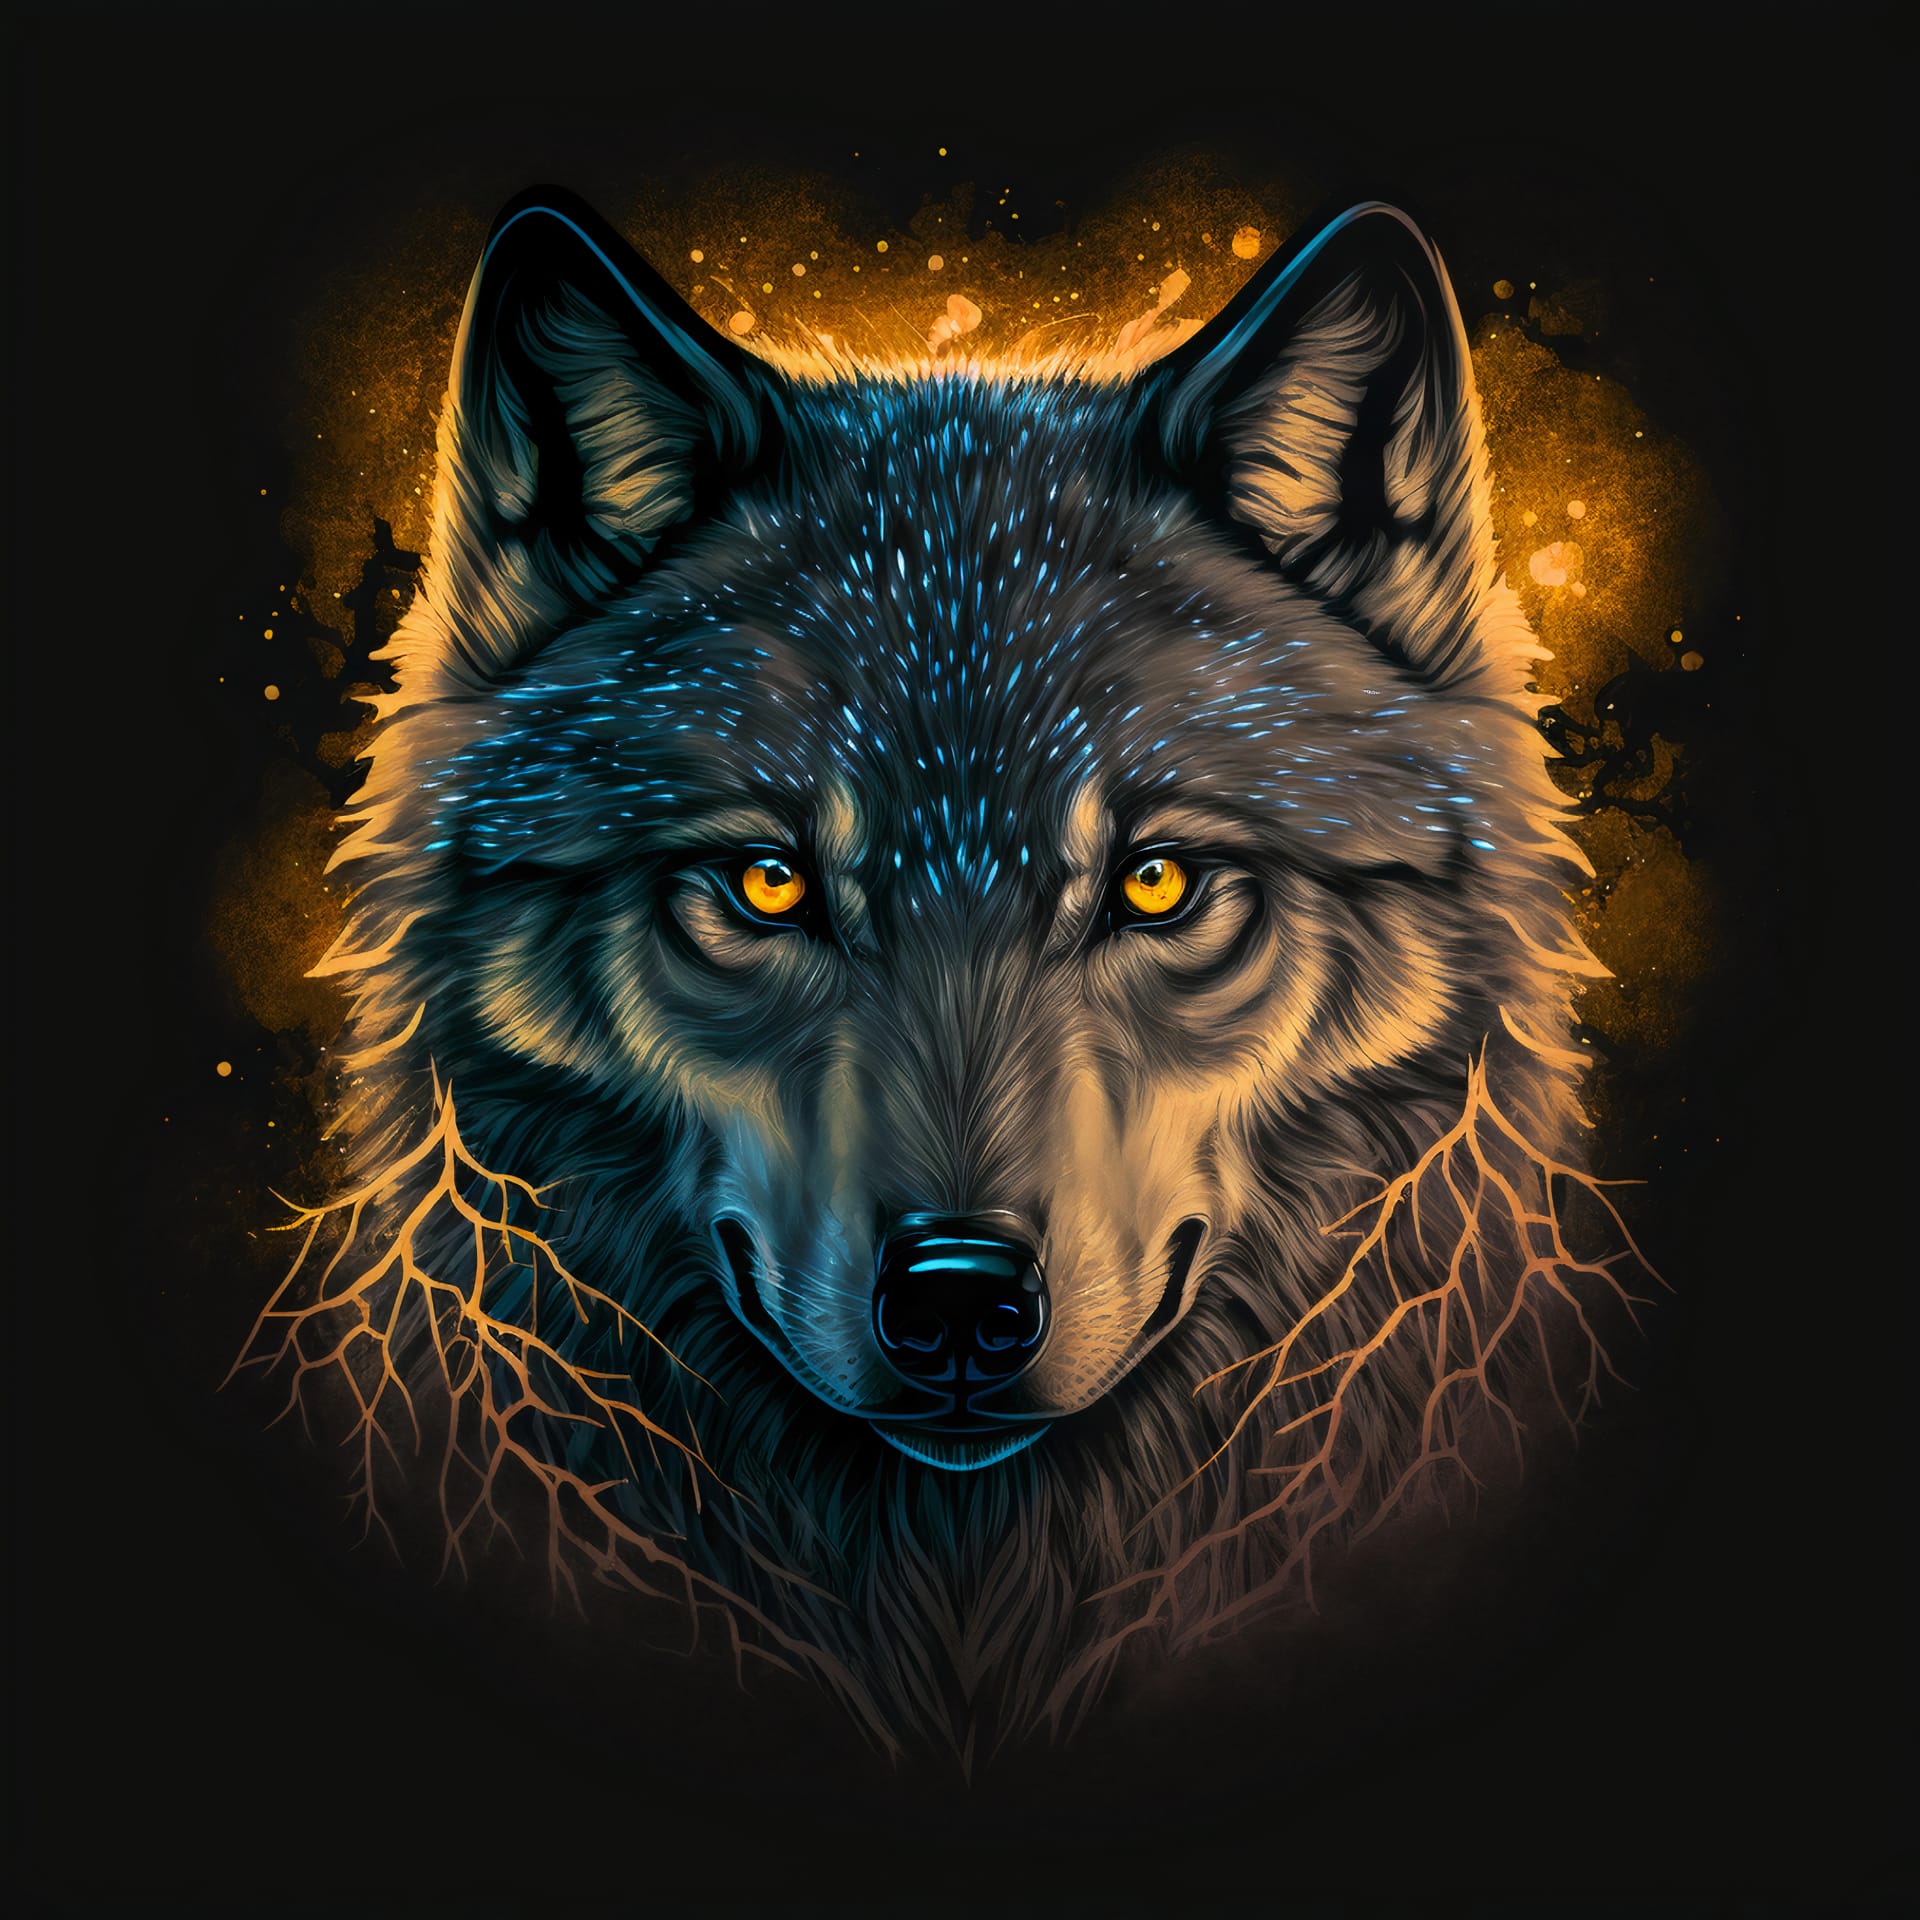 Illustration front view wolf head stunningly beautiful design picture